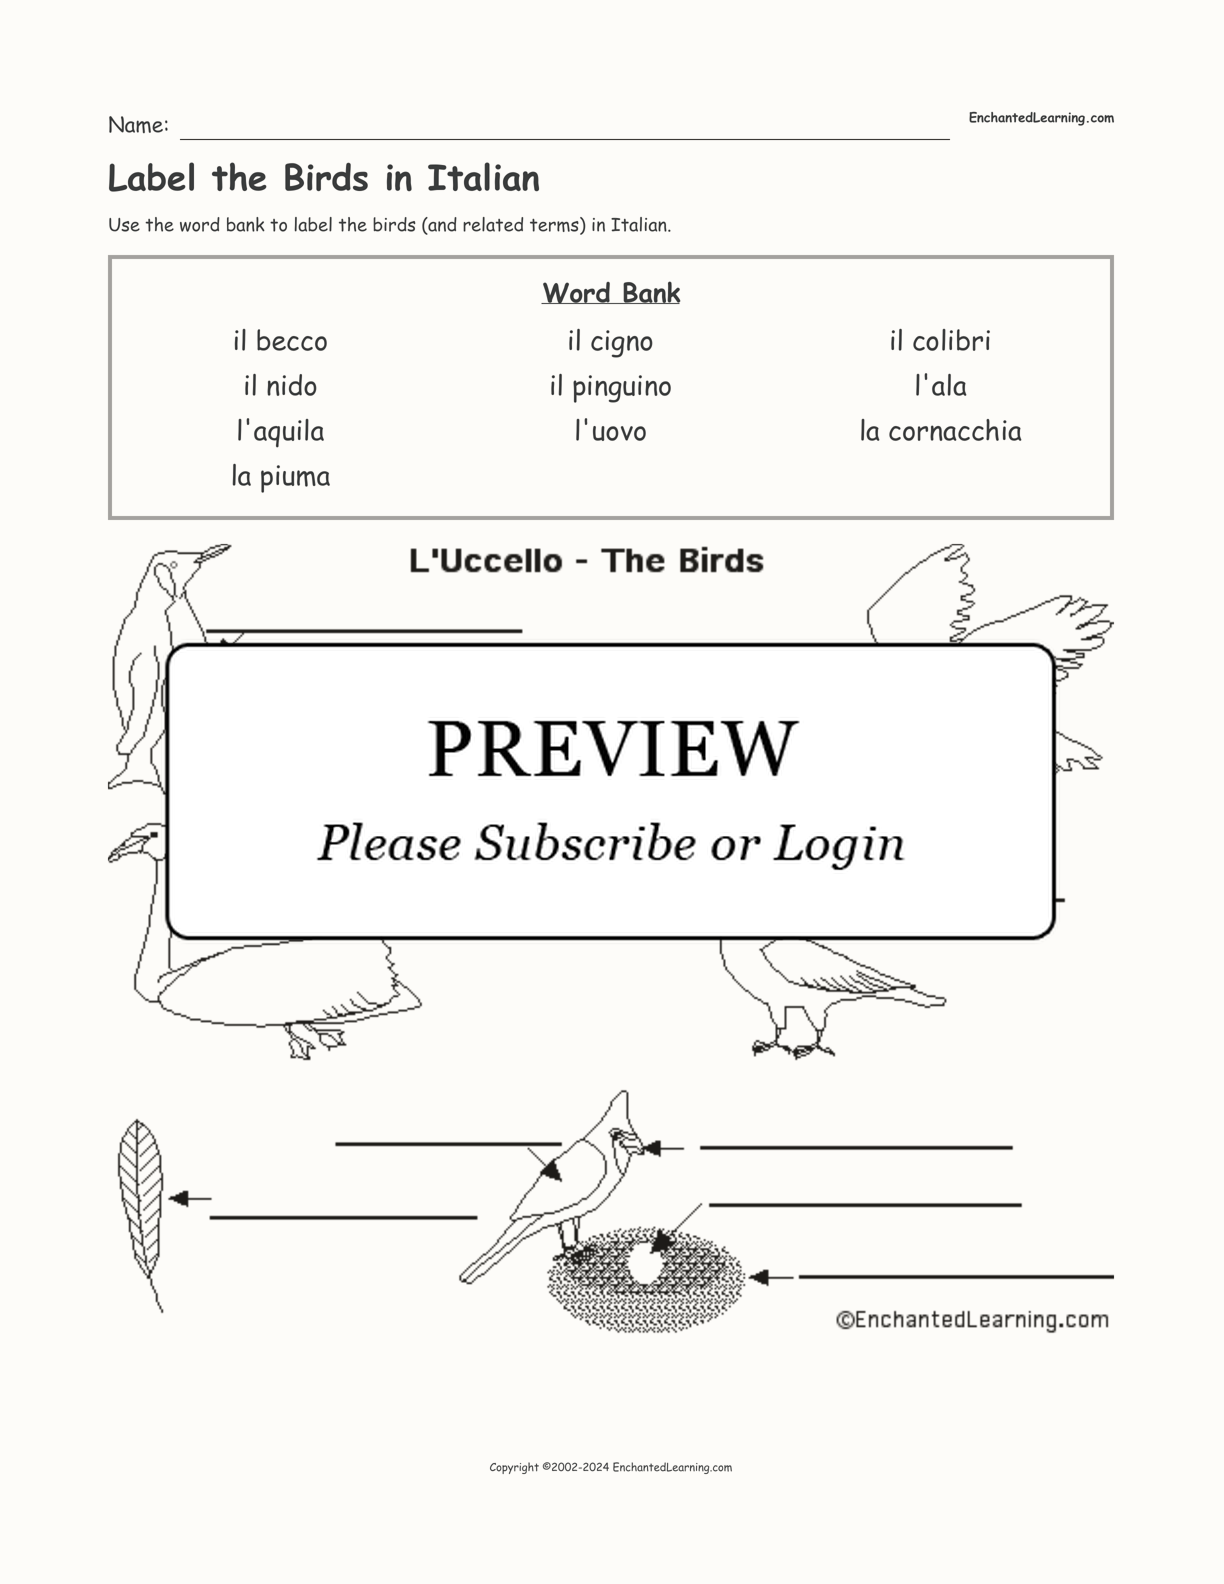 Label the Birds in Italian interactive worksheet page 1